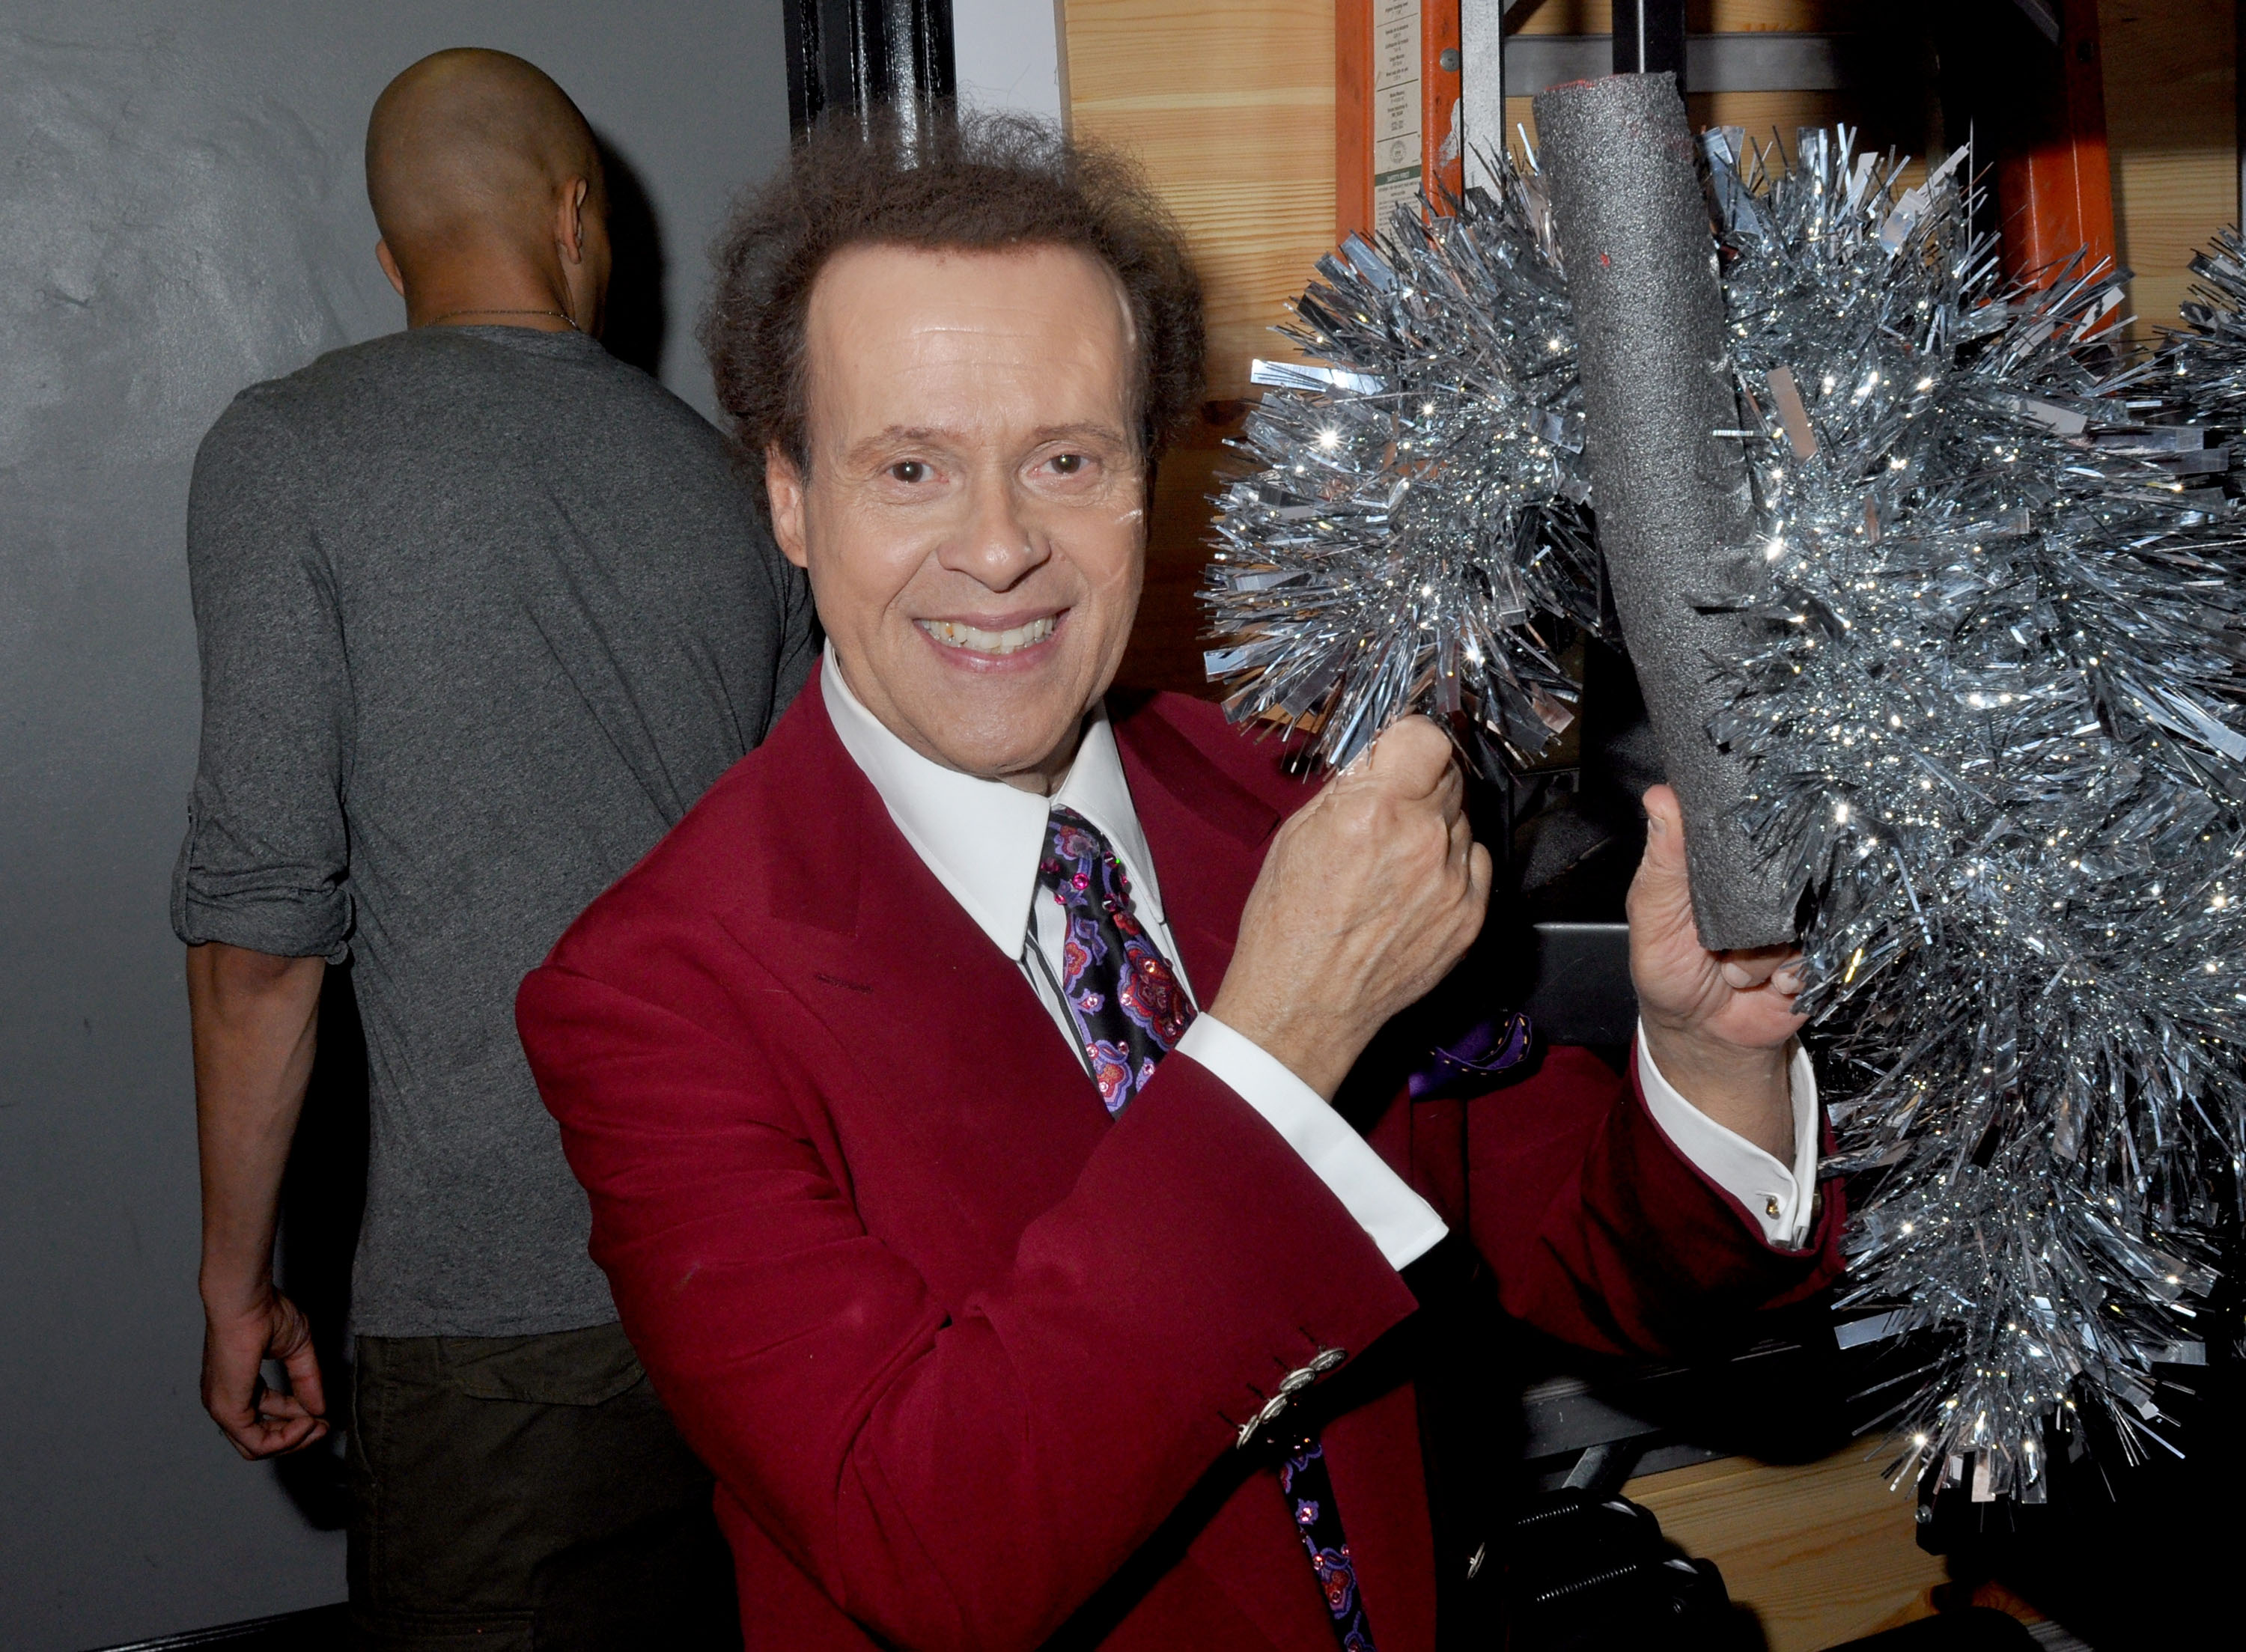 Richard Simmons post performance at SPARKLE: An All-Star Holiday Concert at ACME Comedy Theatre on December 13, 2013, in Los Angeles, California | Source: Getty Images